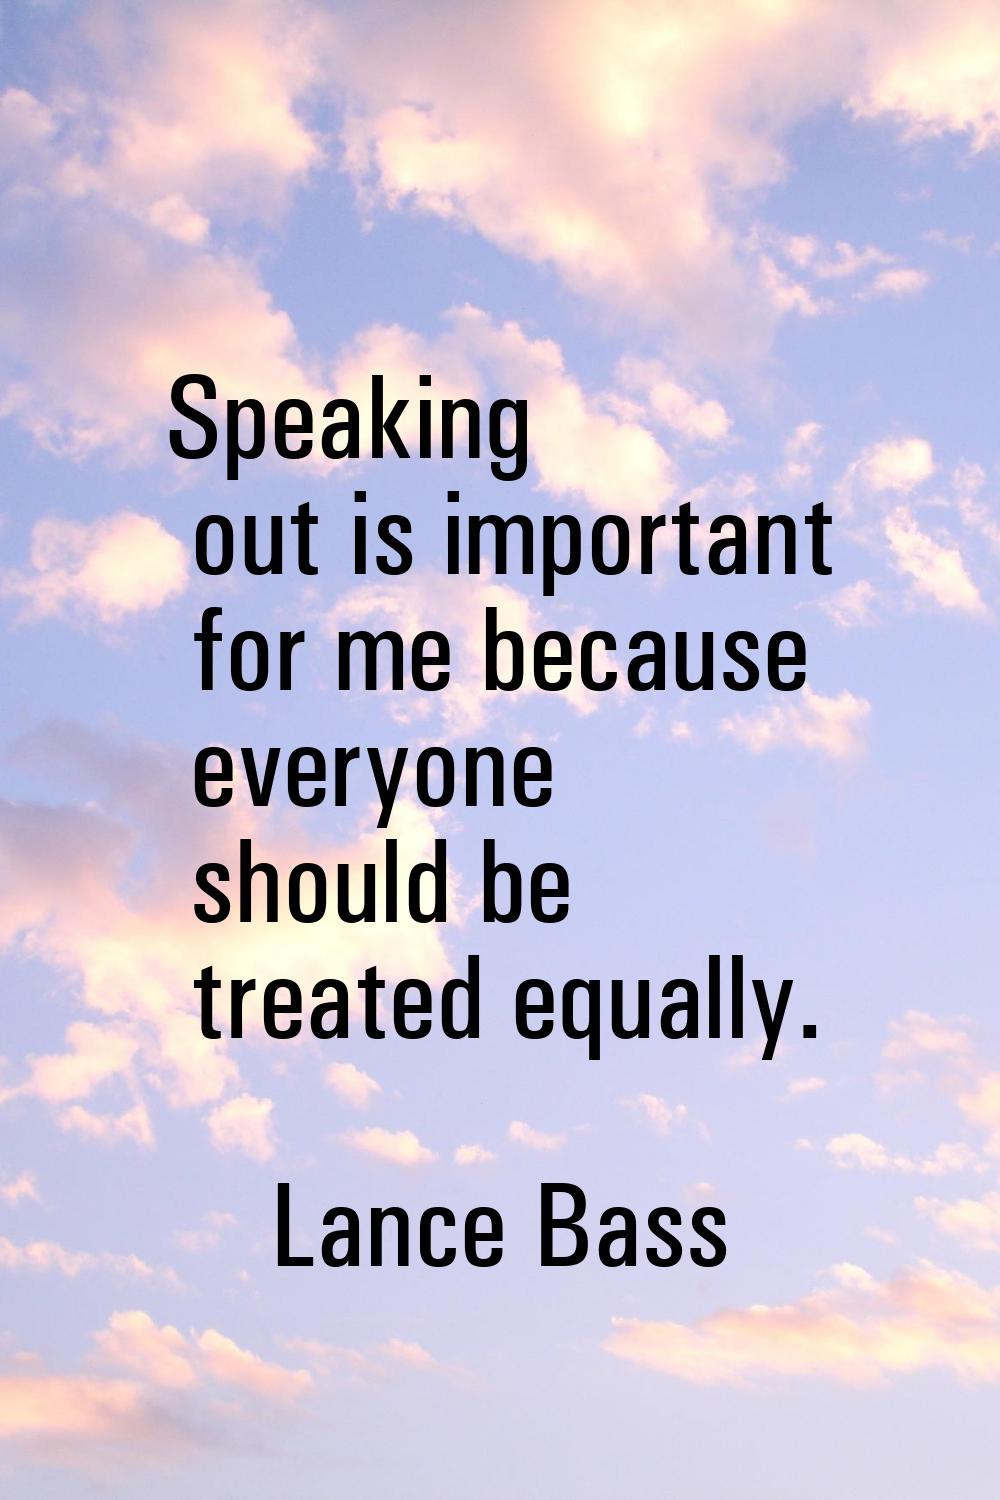 Speaking out is important for me because everyone should be treated equally.